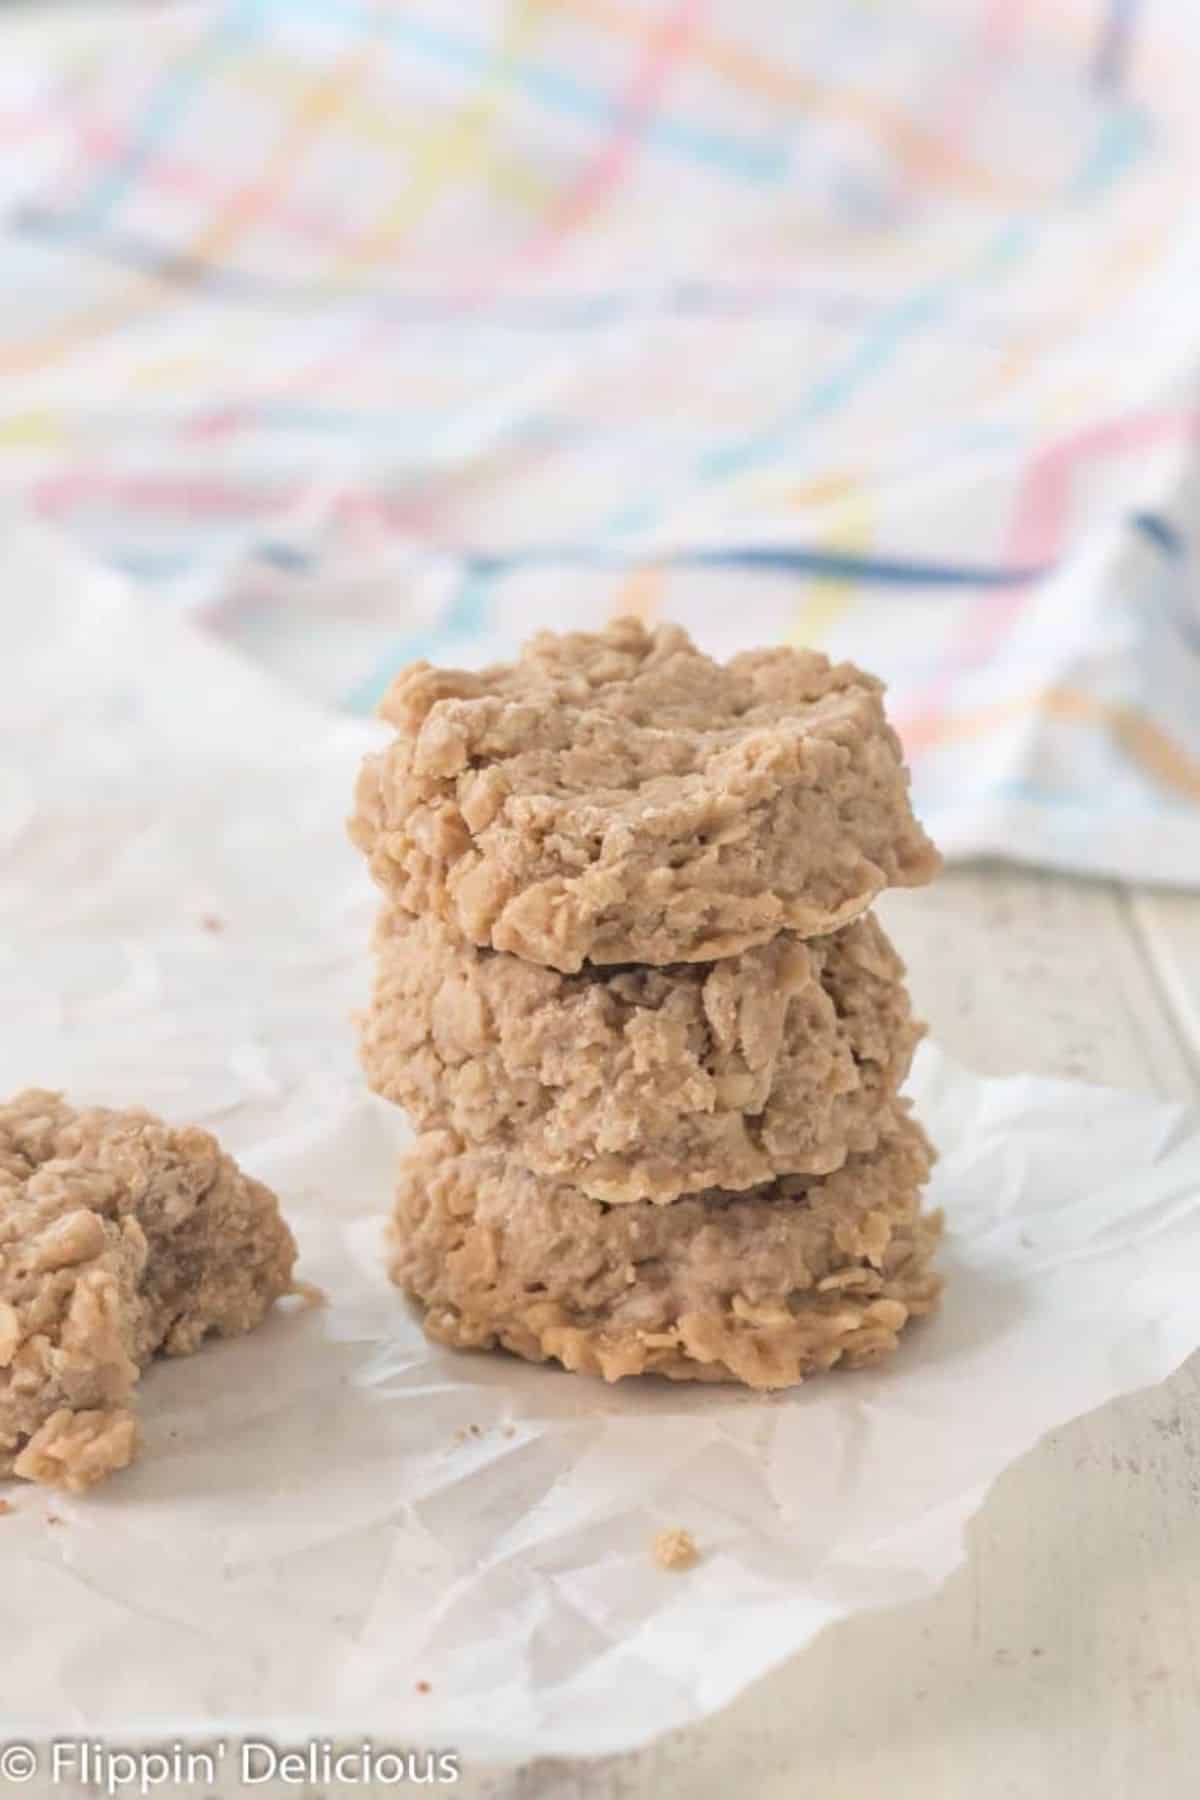 A pile of Gluten-Free No-Bake Cookies.